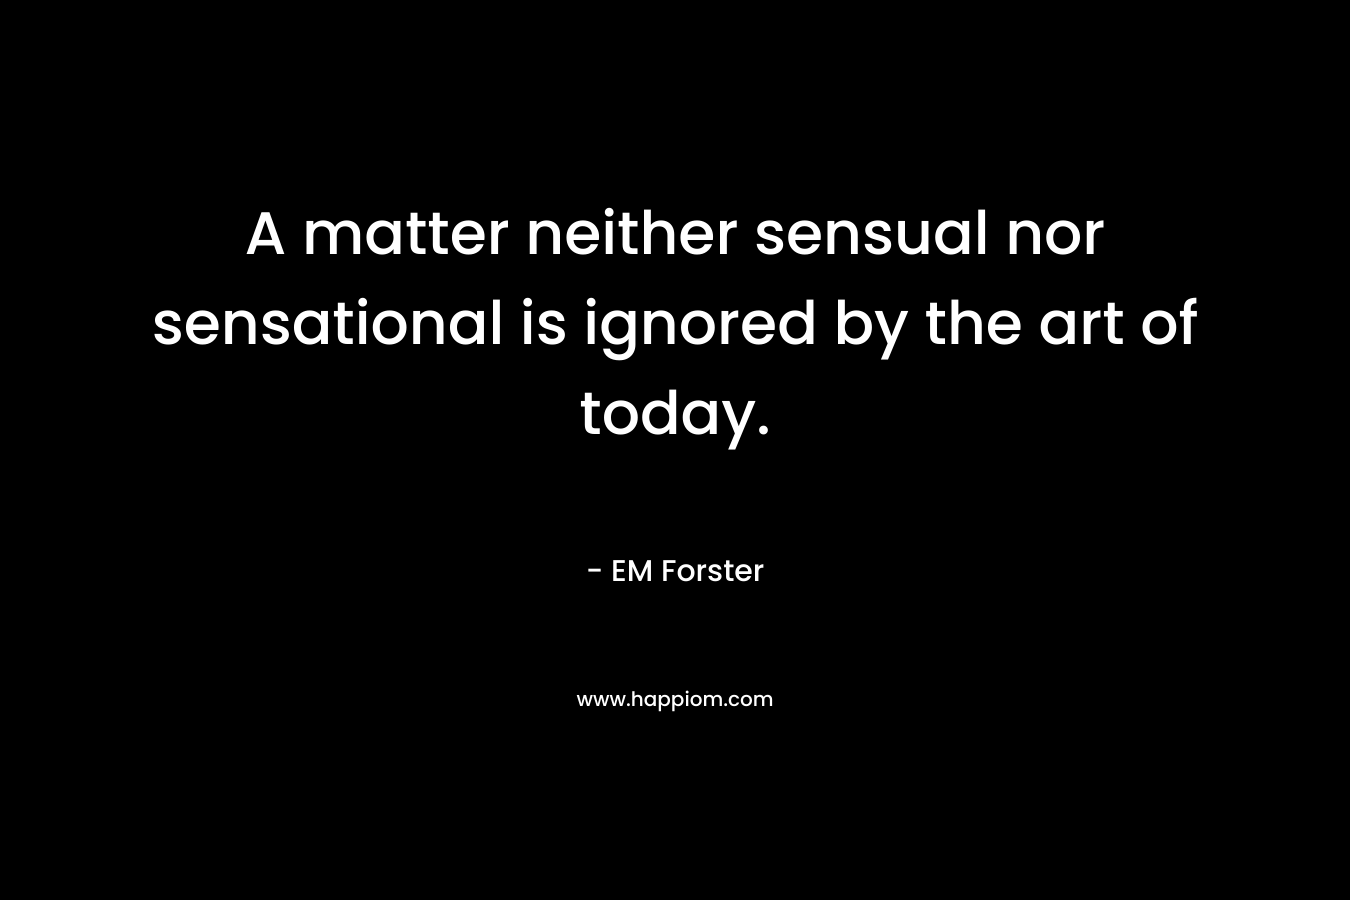 A matter neither sensual nor sensational is ignored by the art of today. – EM Forster